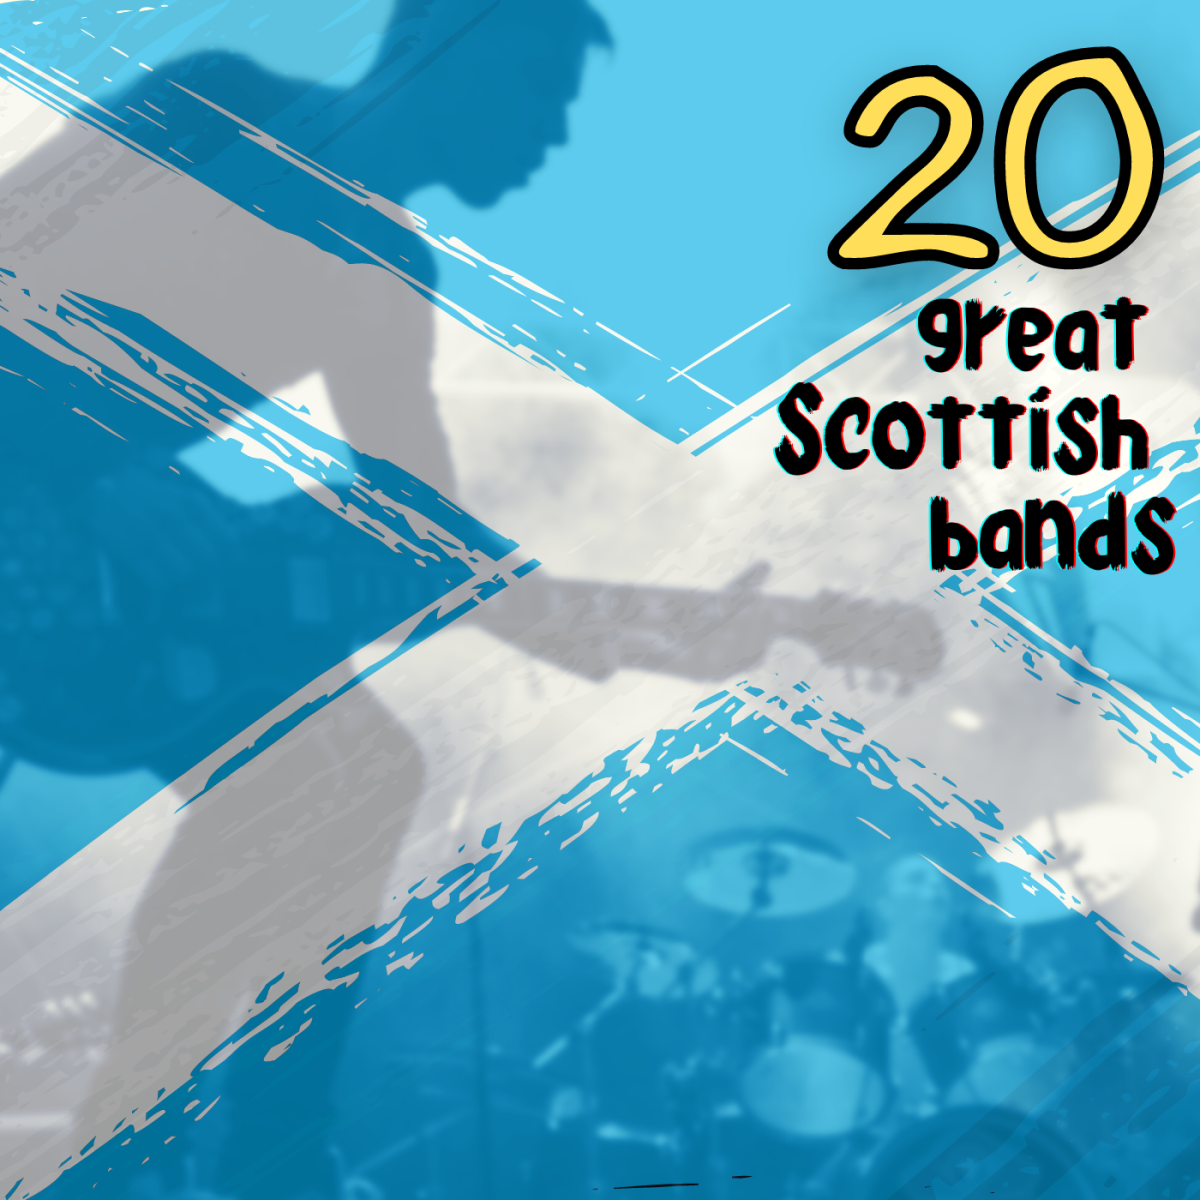 Who are the 20 best Scottish bands?